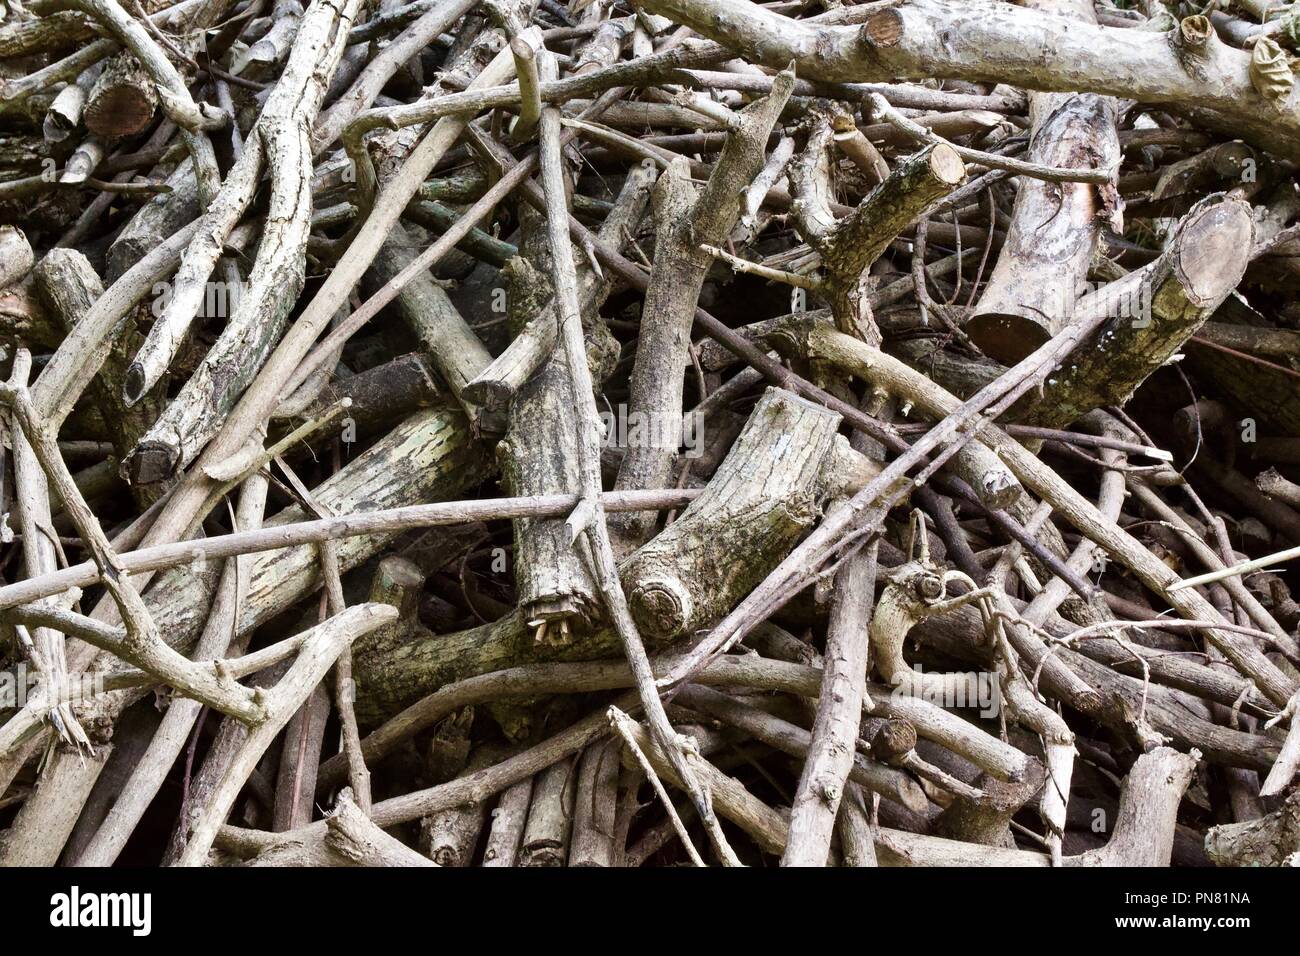 Closeup of a pile of twigs and broken tree branches Stock Photo